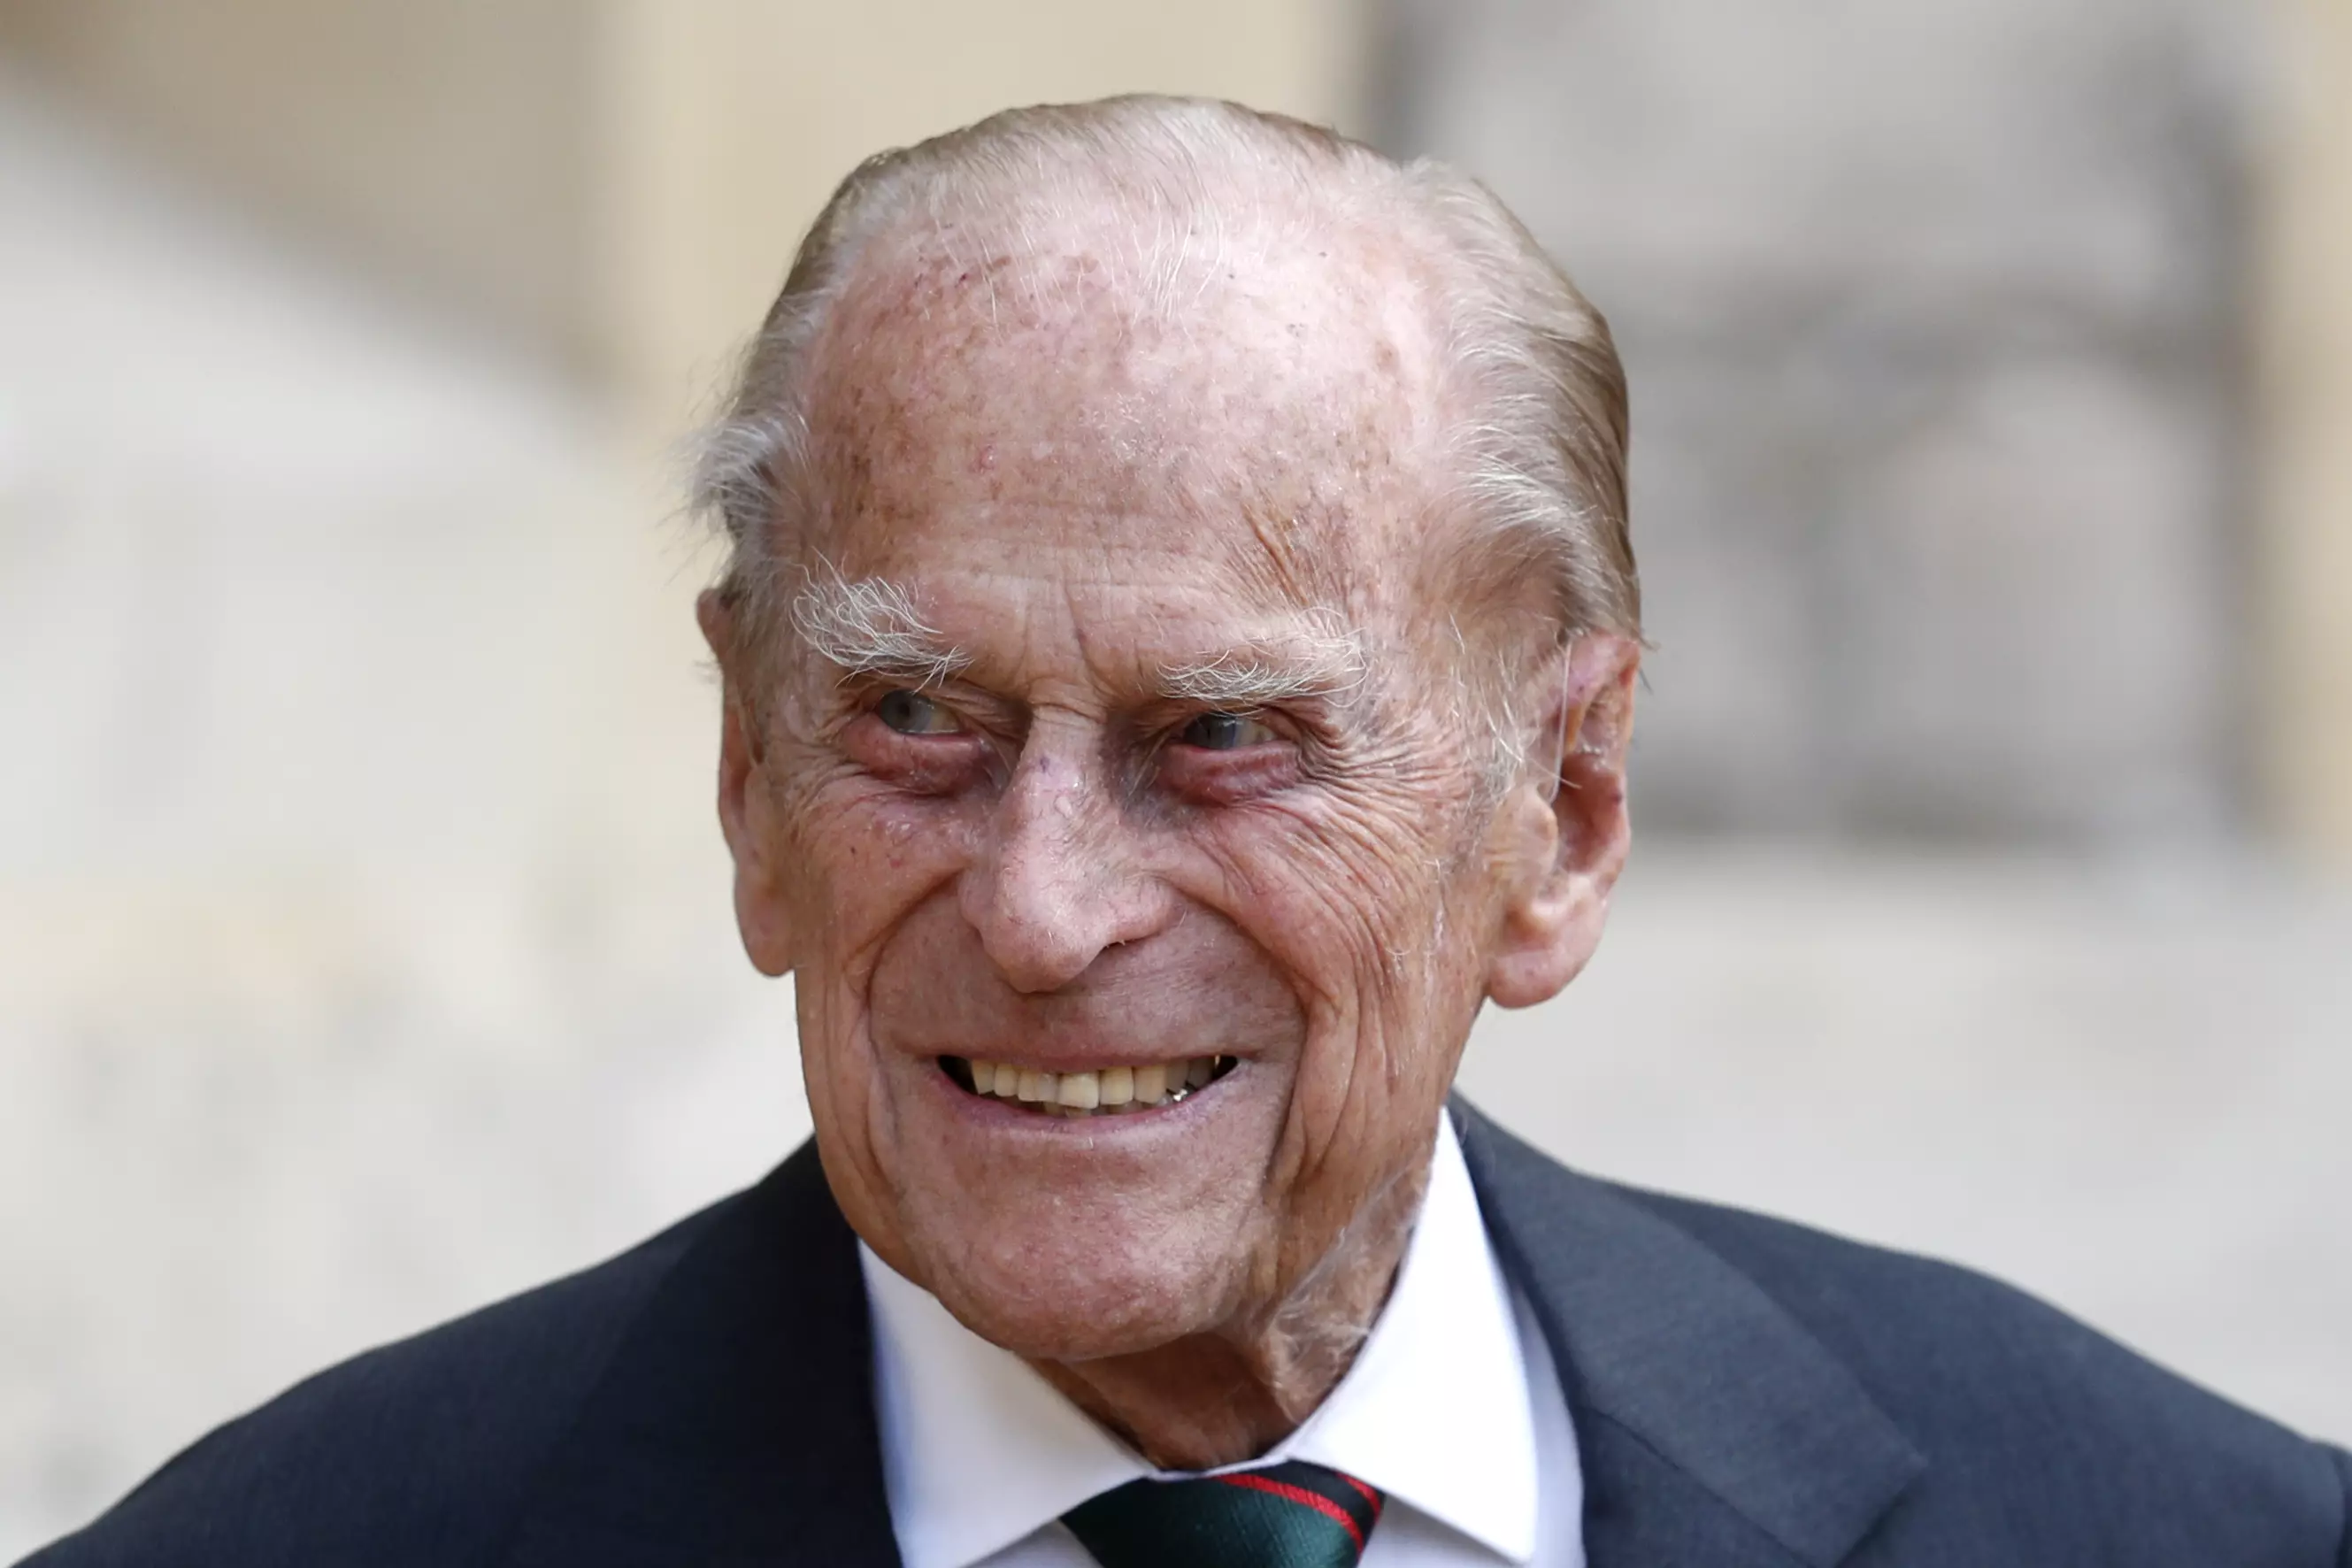 Prince Philip has died at the age of 99.